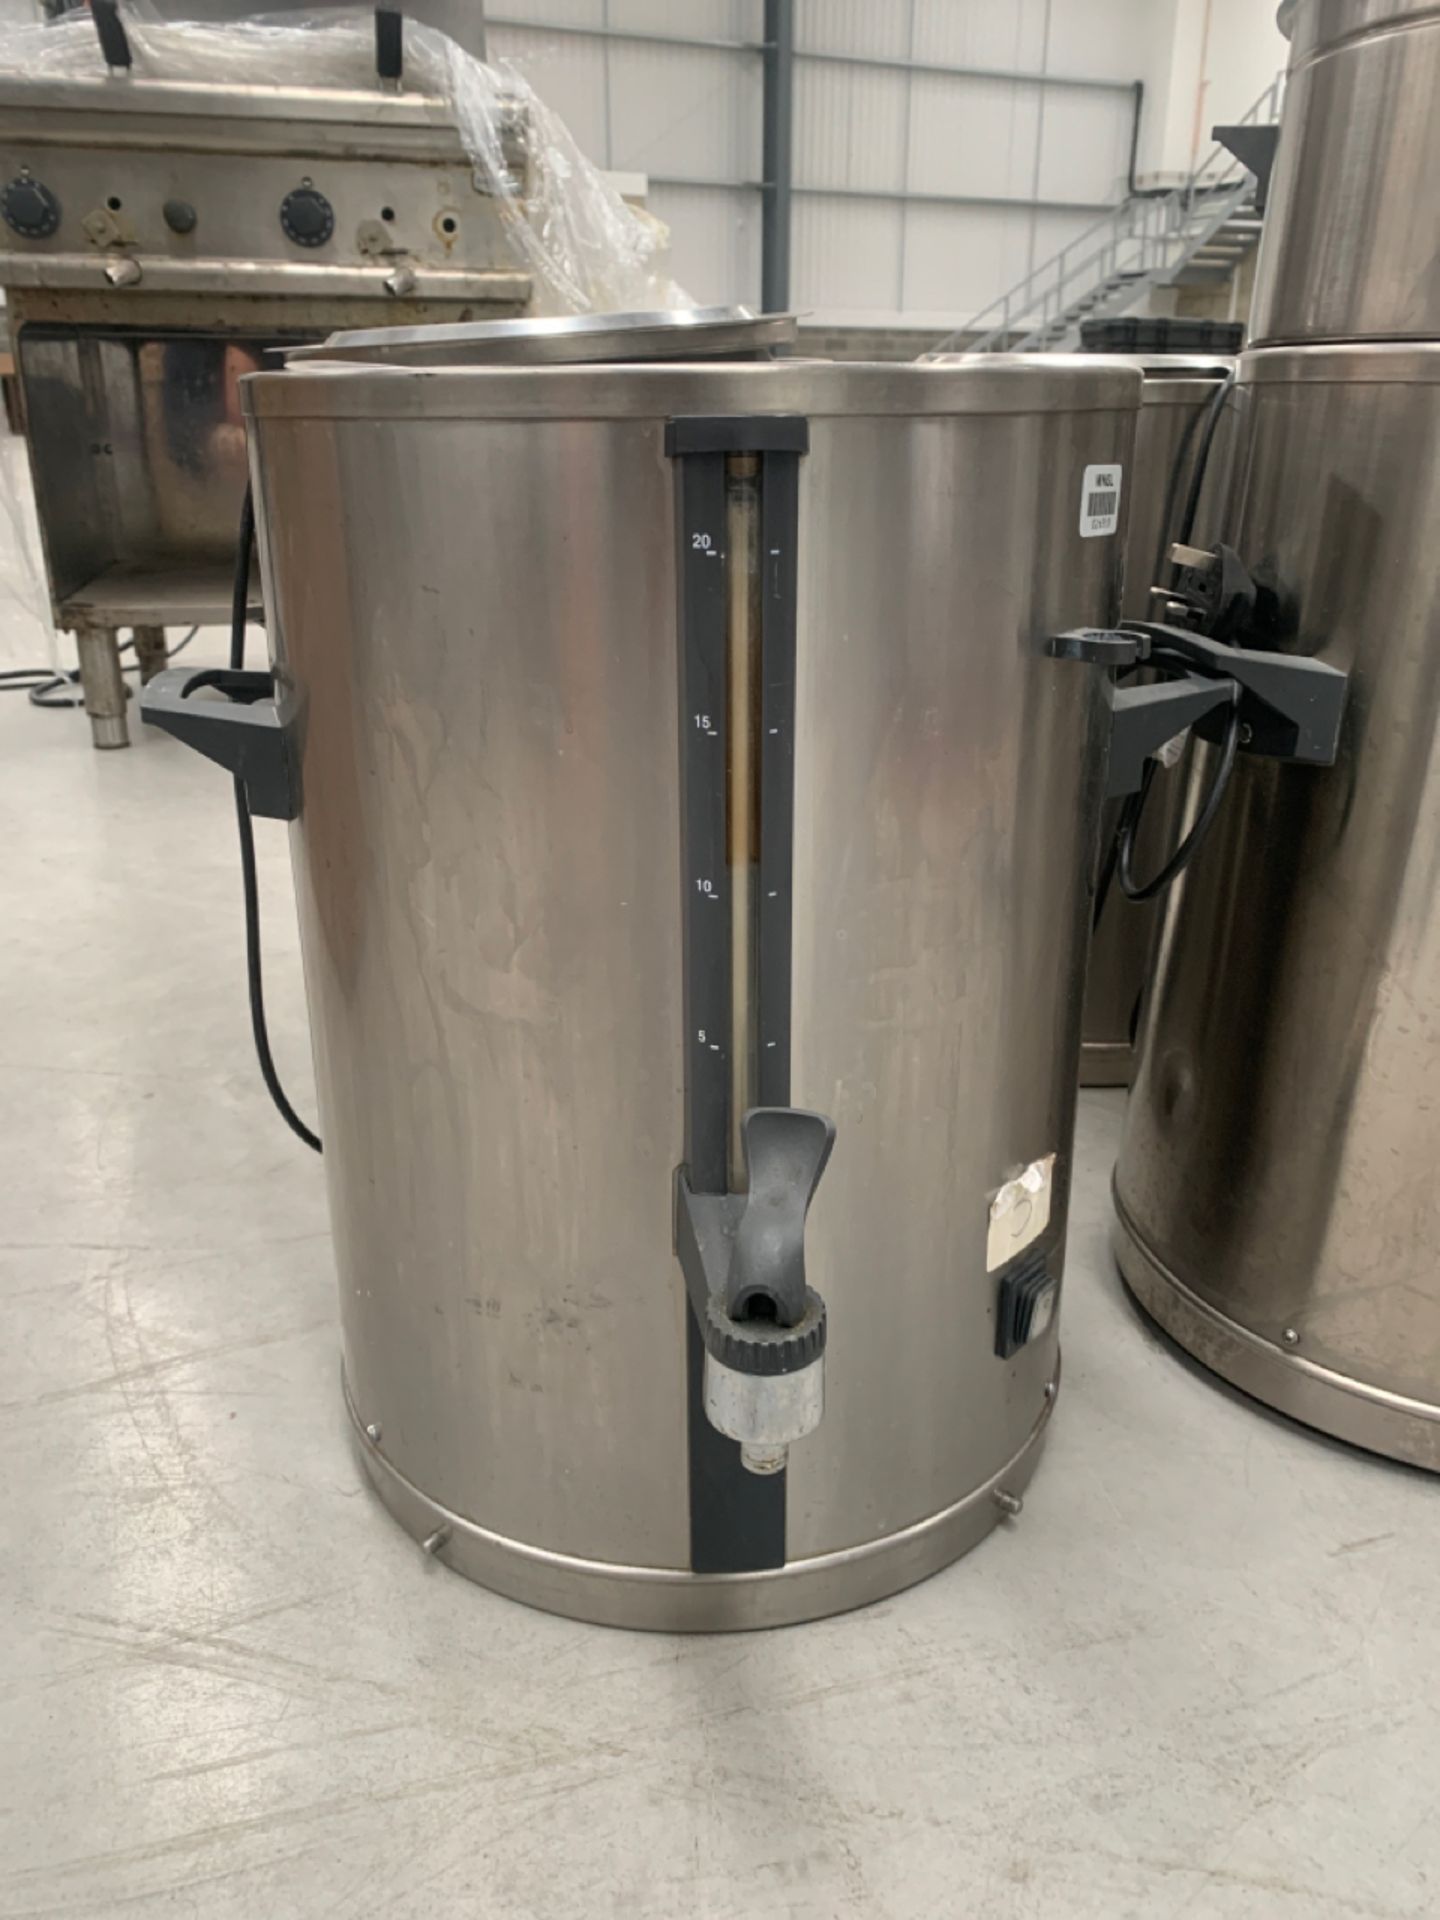 Set of 5 Stainless Steel Thermostatically Controlled 20L Coffee Containers - Image 3 of 5